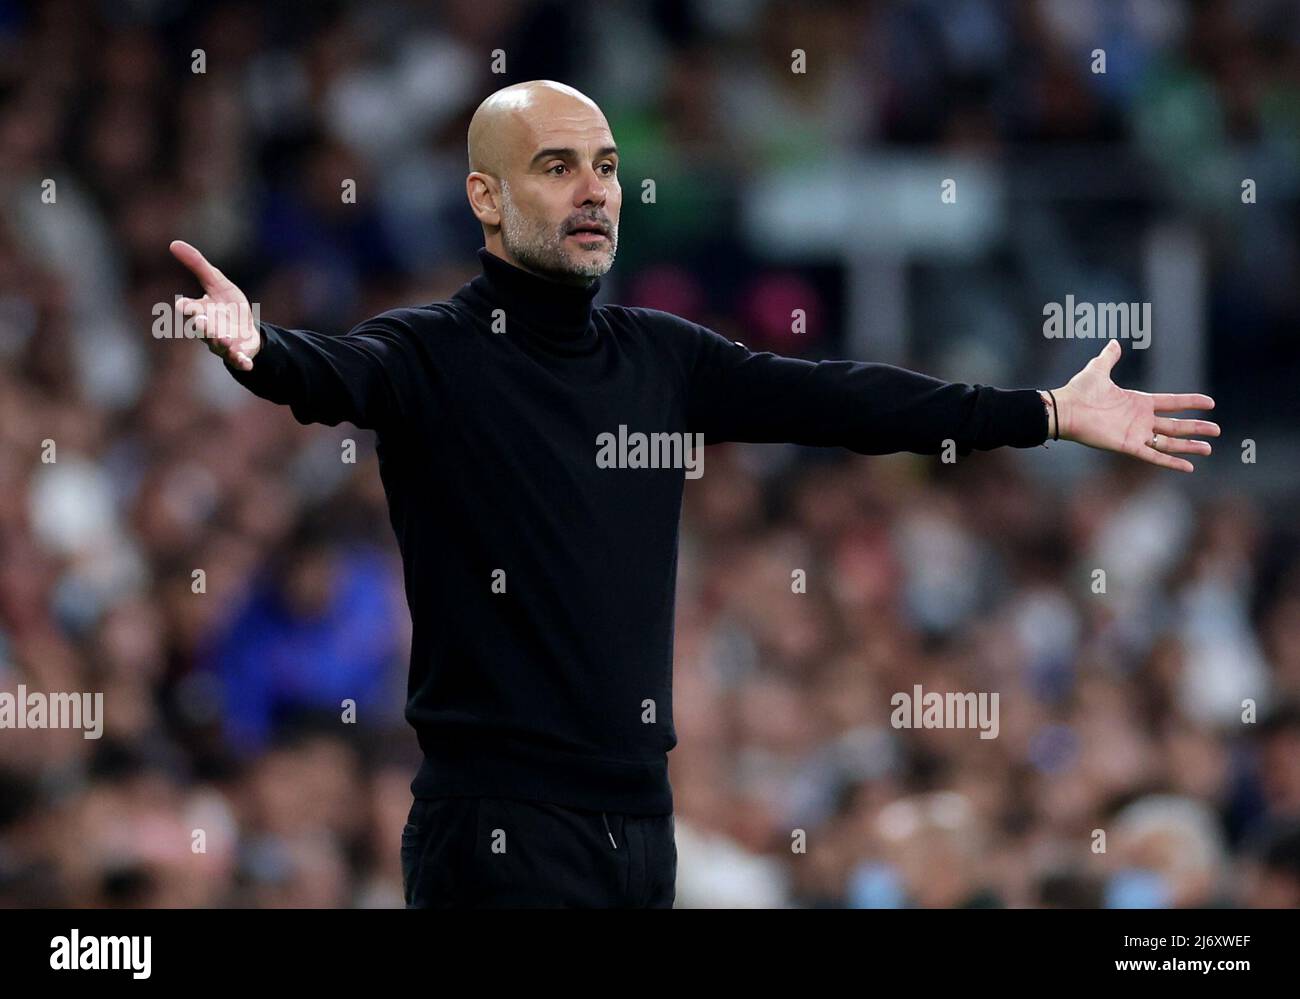 Soccer Football - Champions League - Semi Final - Second Leg - Real Madrid v Manchester City - Santiago Bernabeu, Madrid, Spain - May 4, 2022 Manchester City manager Pep Guardiola Action Images via Reuters/Carl Recine Stock Photo